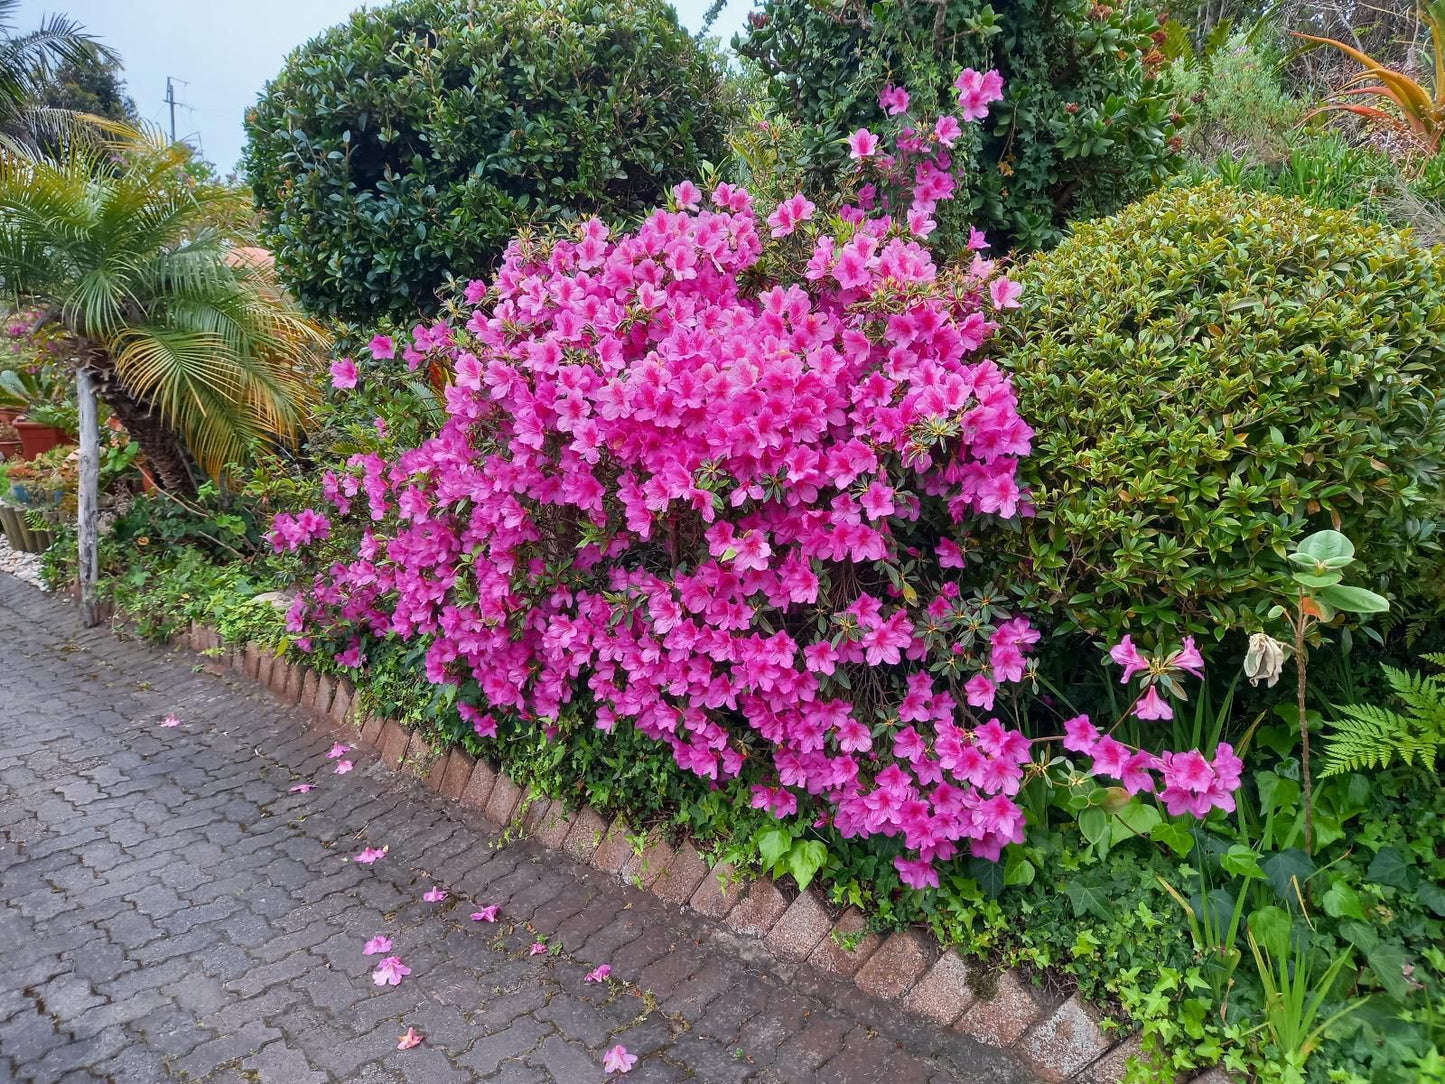 110Bayview Brenton On Sea Knysna Western Cape South Africa Complementary Colors, Blossom, Plant, Nature, Garden